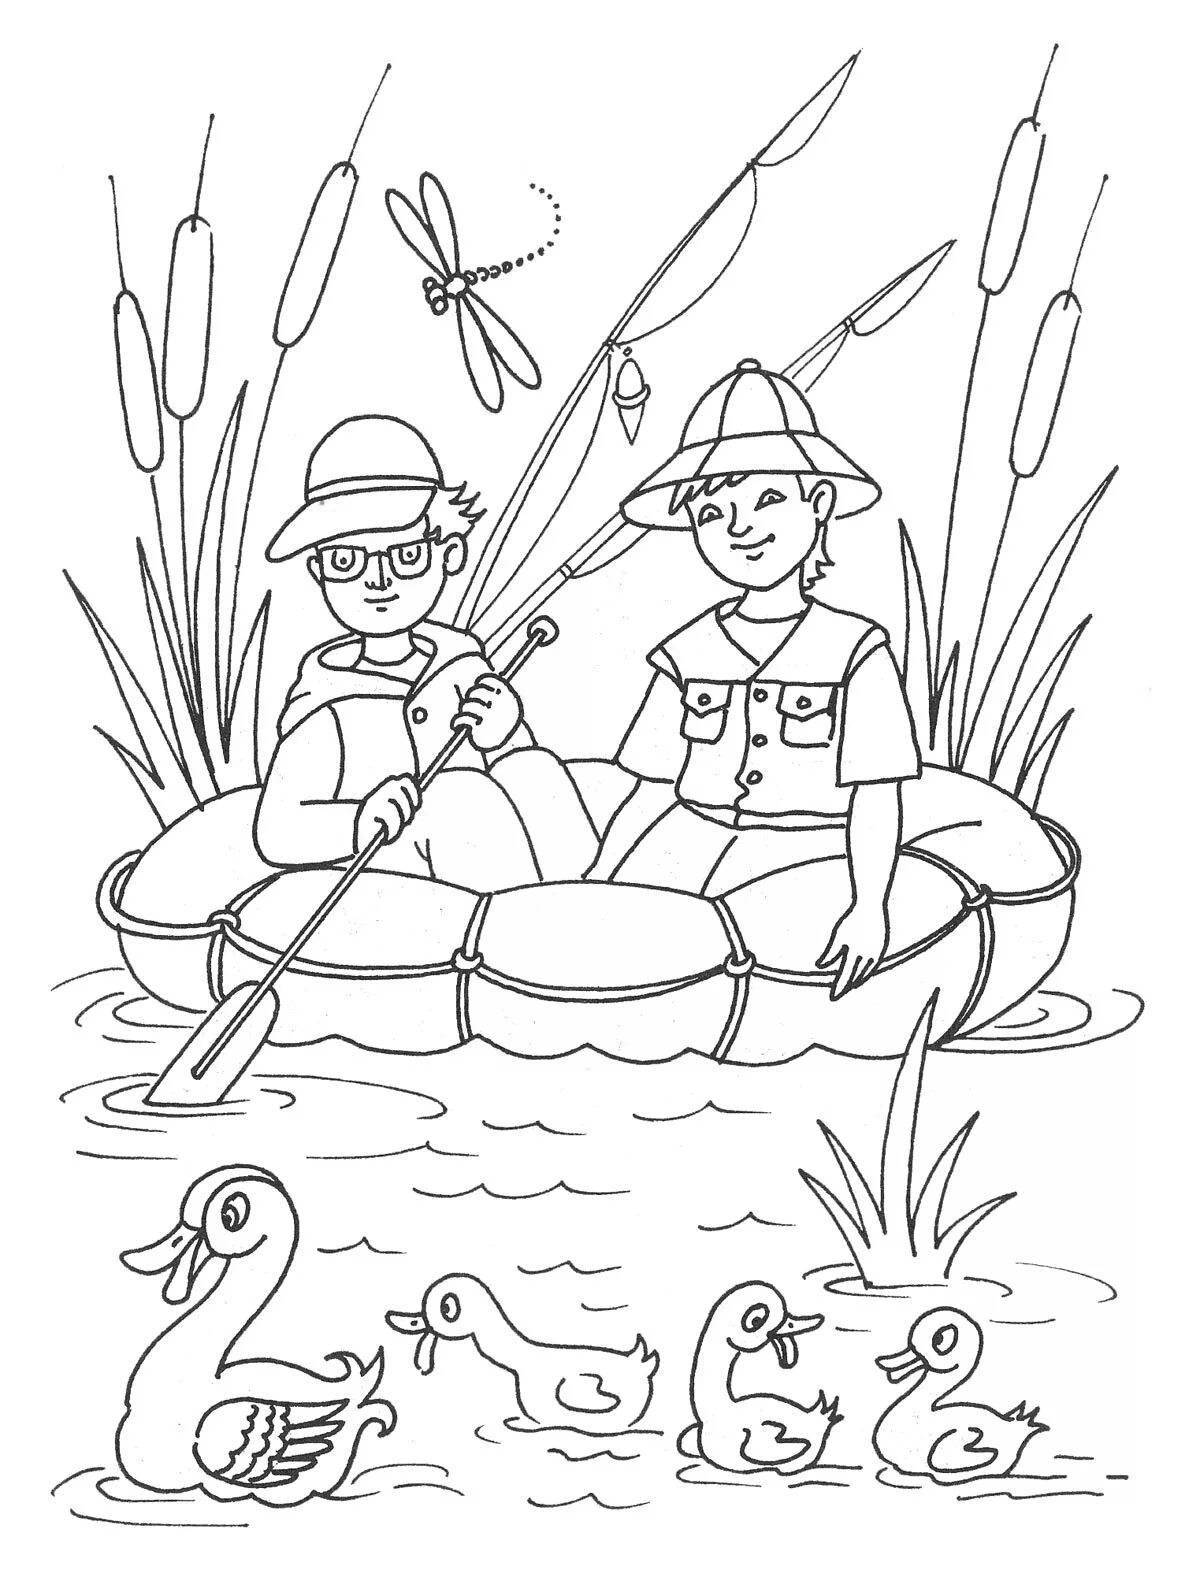 Exquisite fisherman coloring book for kids